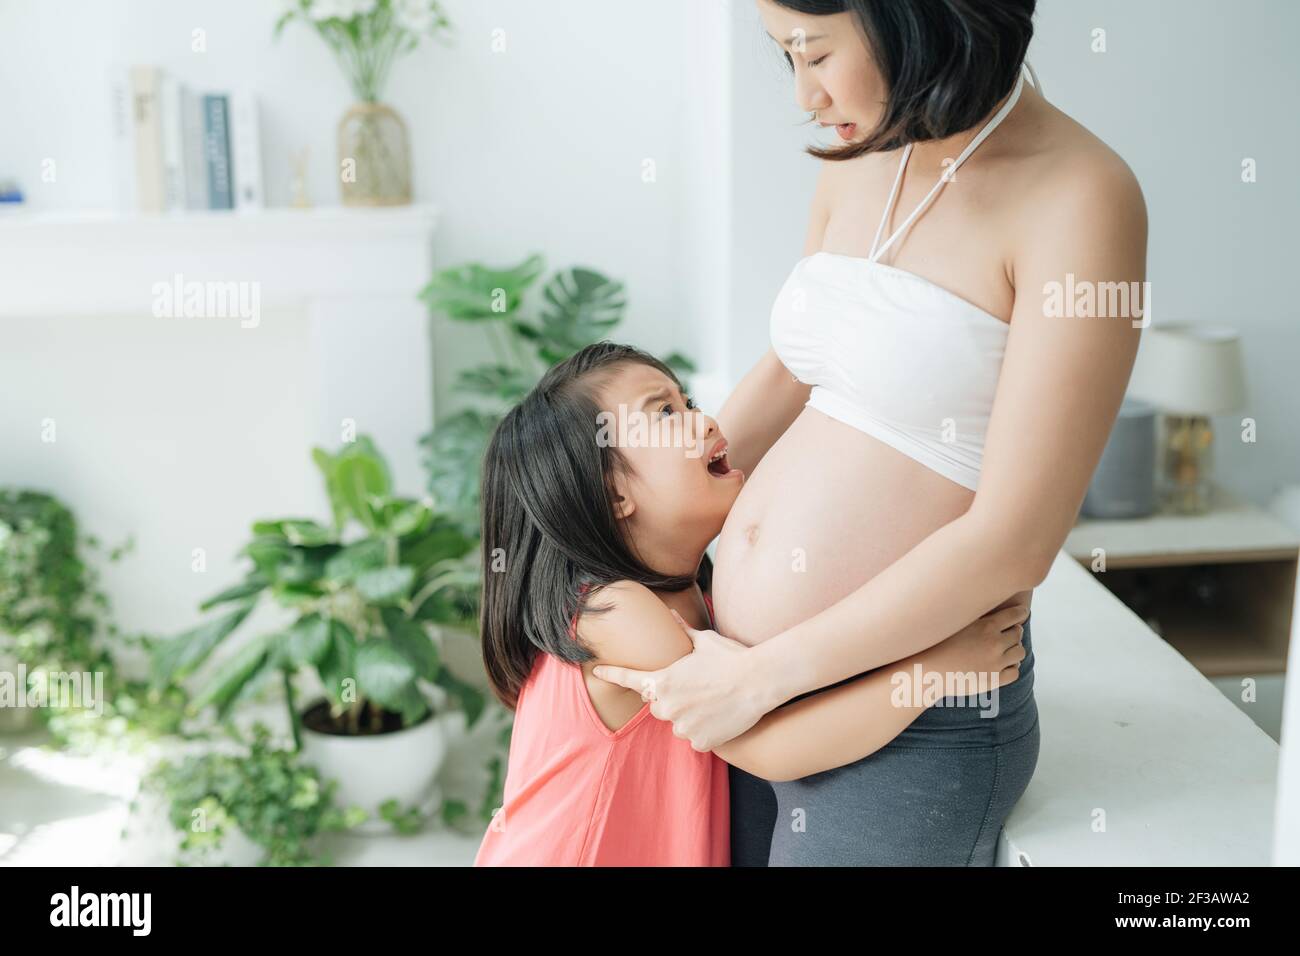 I don't want brother. Sad little daughter looking at her pregnant mom belly, child crying for not wanting sibling, family issue, close up Stock Photo